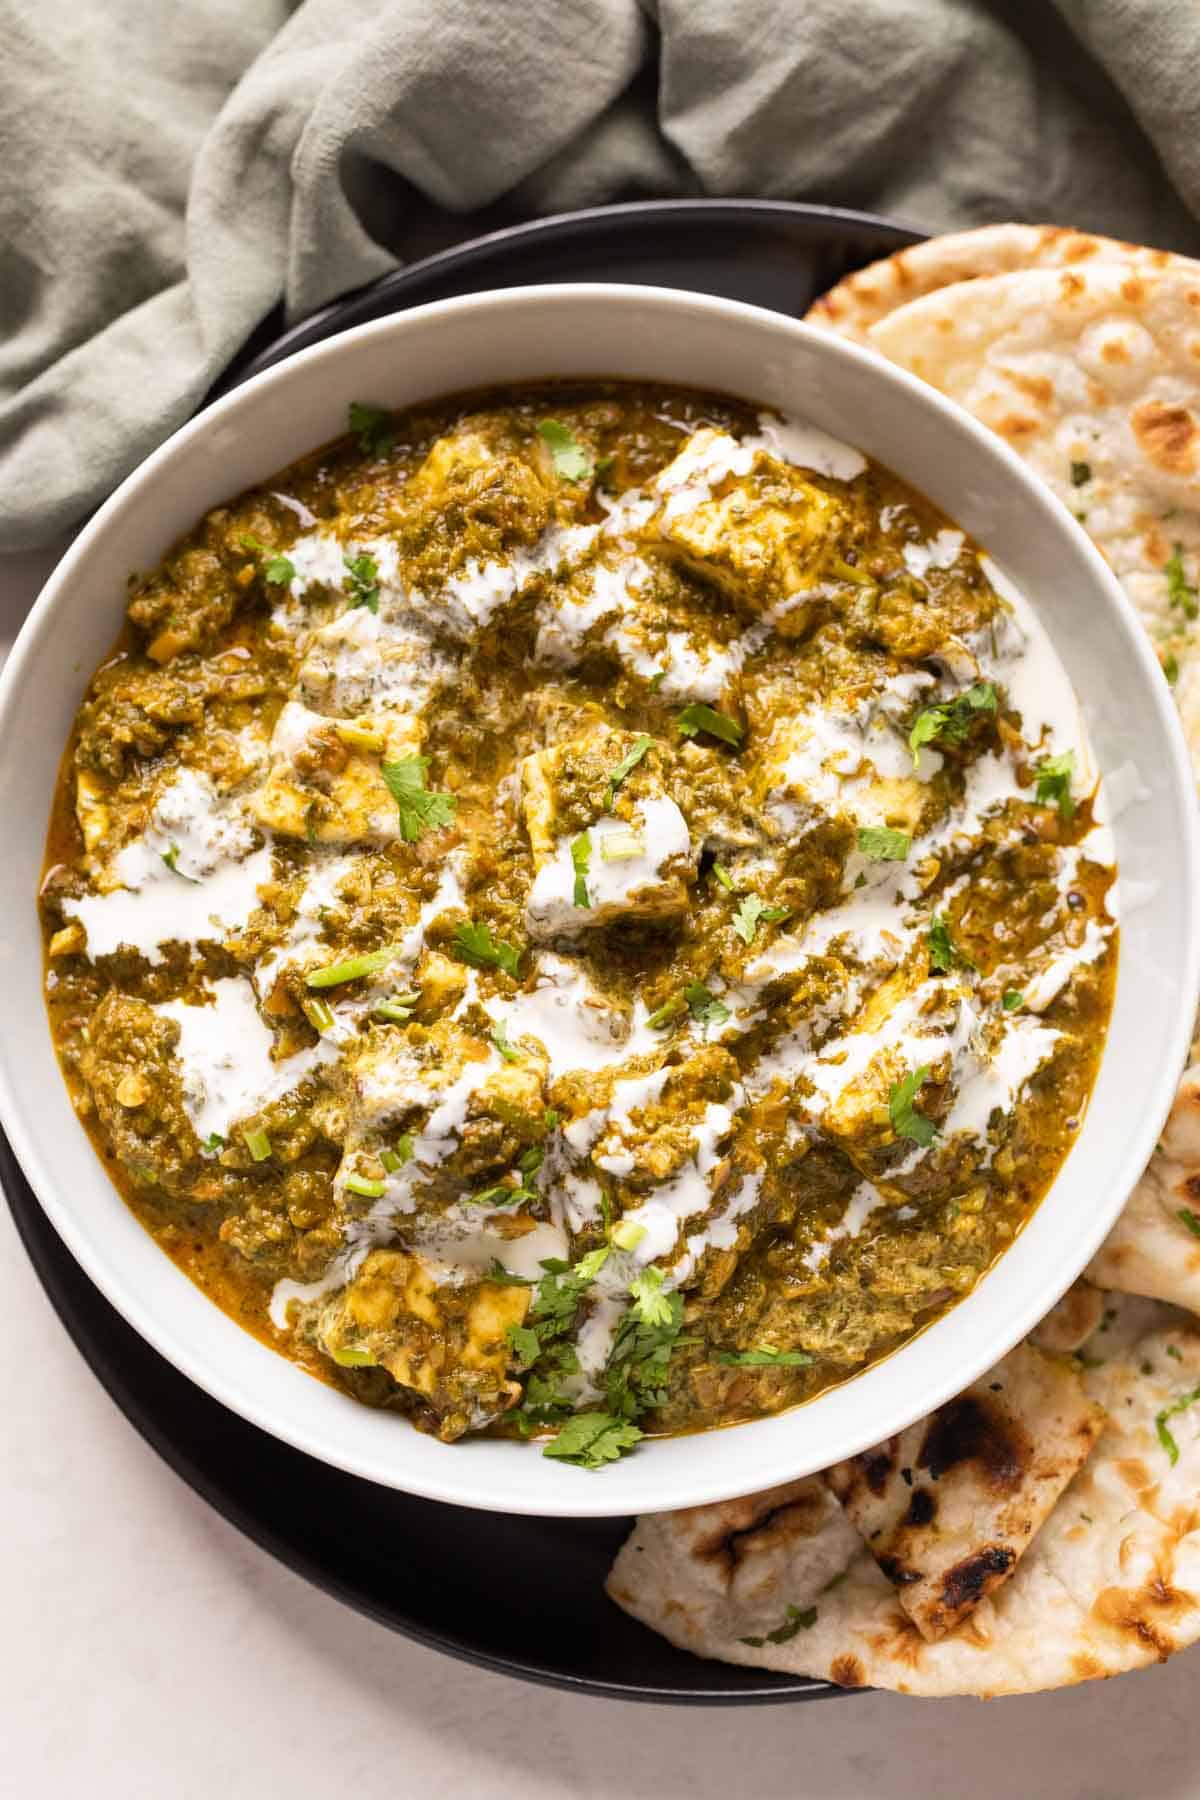 Picture of saag paneer served in a bowl with naan on the side